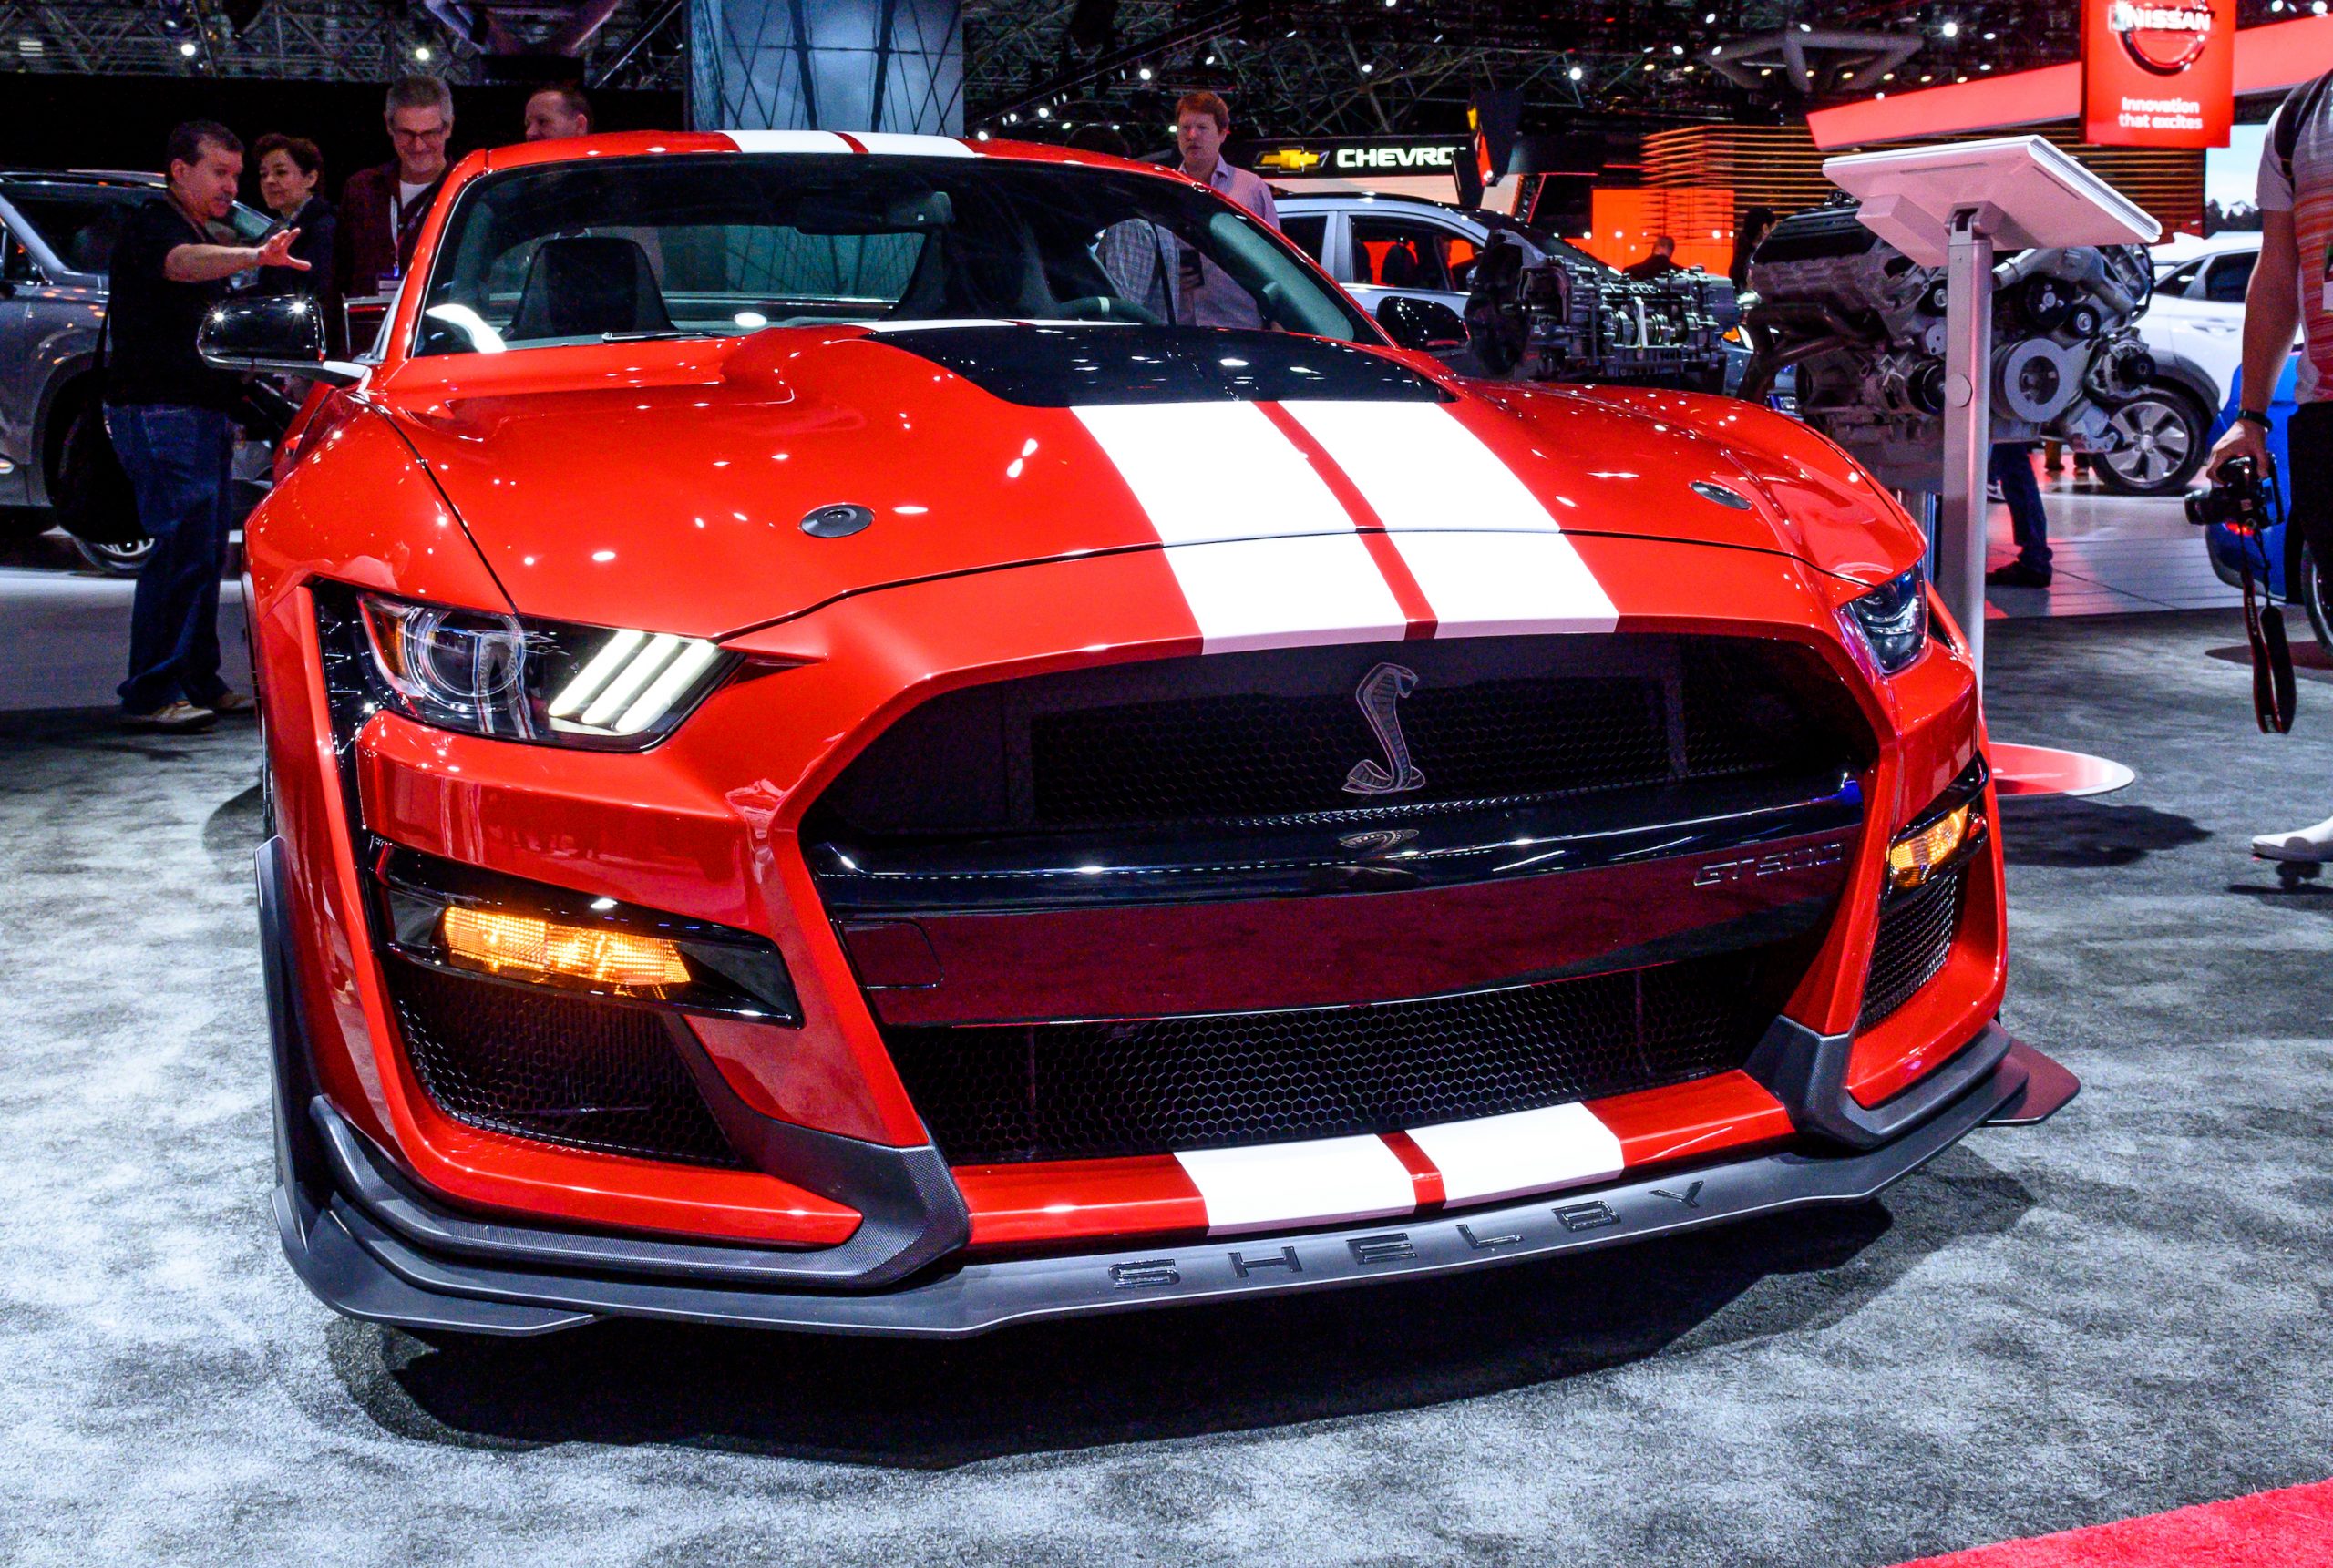 Ford Mustang Shelby GT500 seen at the New York International Auto Show at the Jacob K. Javits Convention Center in New York